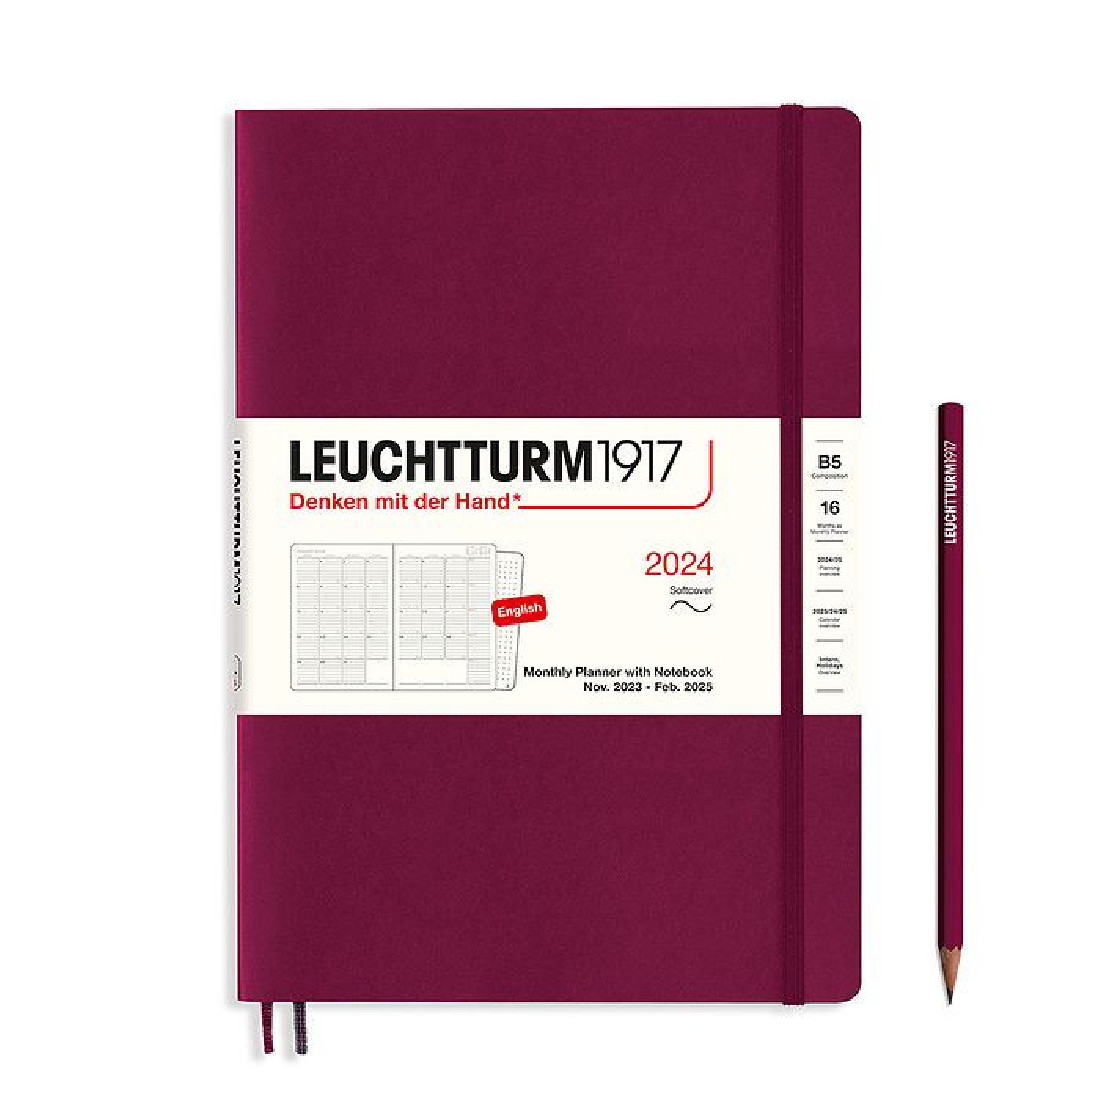 Leuchtturm 1917 Monthly Planner and Notebook 2024 Port Red Composition B5 Soft Cover